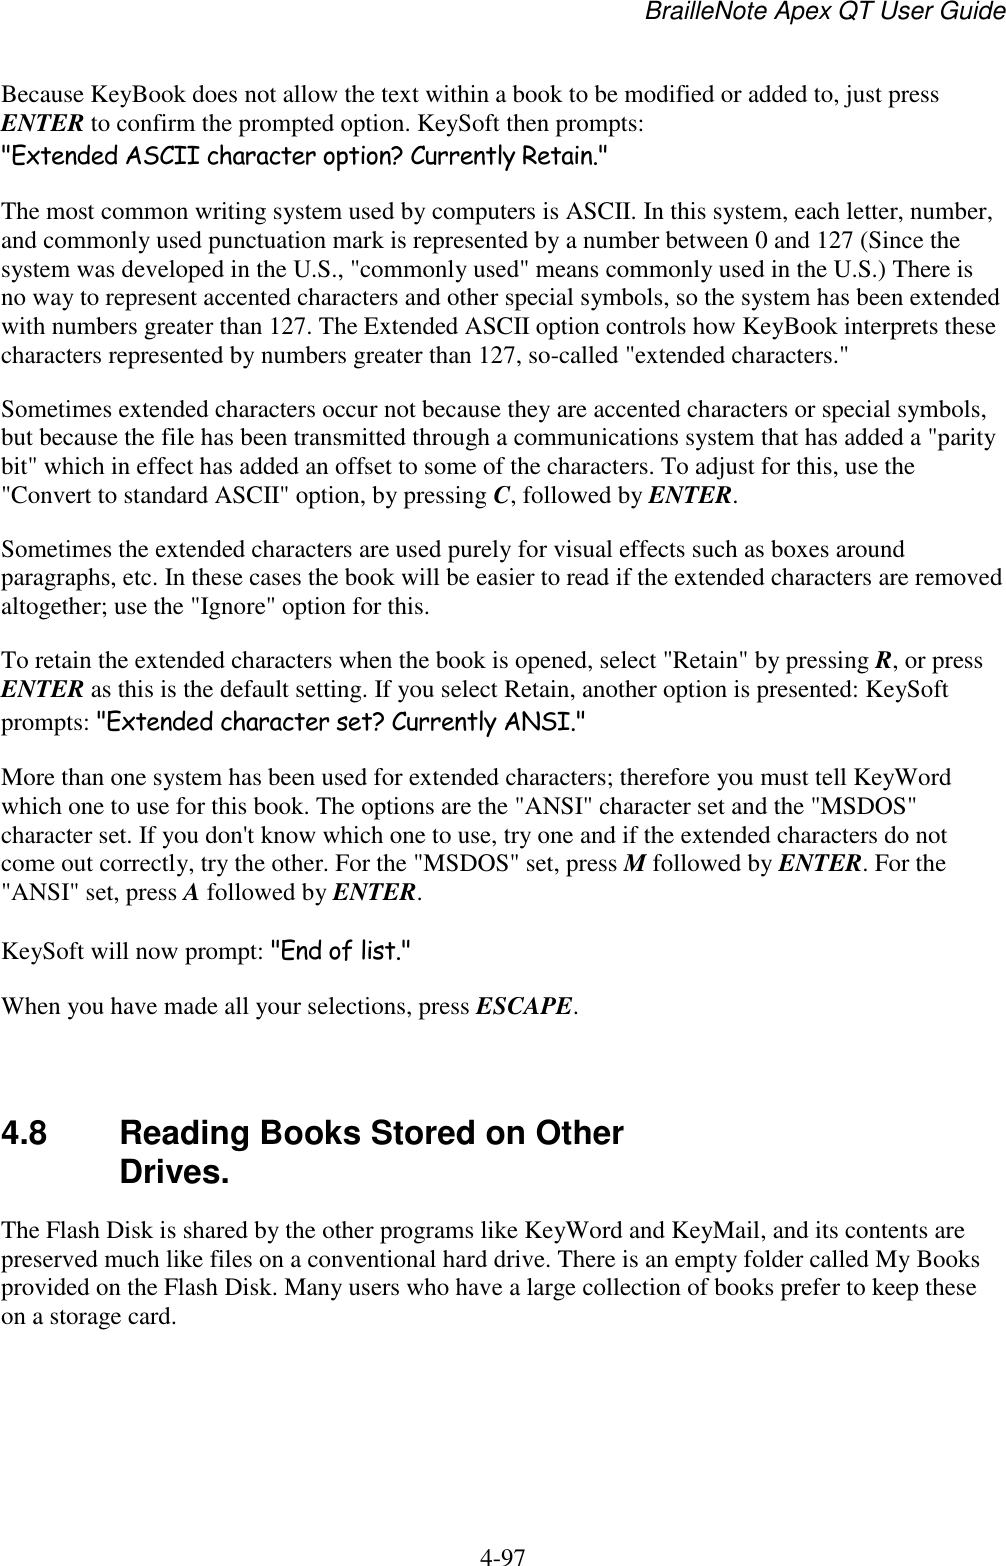 BrailleNote Apex QT User Guide  4-97   Because KeyBook does not allow the text within a book to be modified or added to, just press ENTER to confirm the prompted option. KeySoft then prompts: &quot;Extended ASCII character option? Currently Retain.&quot; The most common writing system used by computers is ASCII. In this system, each letter, number, and commonly used punctuation mark is represented by a number between 0 and 127 (Since the system was developed in the U.S., &quot;commonly used&quot; means commonly used in the U.S.) There is no way to represent accented characters and other special symbols, so the system has been extended with numbers greater than 127. The Extended ASCII option controls how KeyBook interprets these characters represented by numbers greater than 127, so-called &quot;extended characters.&quot; Sometimes extended characters occur not because they are accented characters or special symbols, but because the file has been transmitted through a communications system that has added a &quot;parity bit&quot; which in effect has added an offset to some of the characters. To adjust for this, use the &quot;Convert to standard ASCII&quot; option, by pressing C, followed by ENTER. Sometimes the extended characters are used purely for visual effects such as boxes around paragraphs, etc. In these cases the book will be easier to read if the extended characters are removed altogether; use the &quot;Ignore&quot; option for this. To retain the extended characters when the book is opened, select &quot;Retain&quot; by pressing R, or press ENTER as this is the default setting. If you select Retain, another option is presented: KeySoft prompts: &quot;Extended character set? Currently ANSI.&quot; More than one system has been used for extended characters; therefore you must tell KeyWord which one to use for this book. The options are the &quot;ANSI&quot; character set and the &quot;MSDOS&quot; character set. If you don&apos;t know which one to use, try one and if the extended characters do not come out correctly, try the other. For the &quot;MSDOS&quot; set, press M followed by ENTER. For the &quot;ANSI&quot; set, press A followed by ENTER. KeySoft will now prompt: &quot;End of list.&quot; When you have made all your selections, press ESCAPE.   4.8  Reading Books Stored on Other Drives. The Flash Disk is shared by the other programs like KeyWord and KeyMail, and its contents are preserved much like files on a conventional hard drive. There is an empty folder called My Books provided on the Flash Disk. Many users who have a large collection of books prefer to keep these on a storage card.   